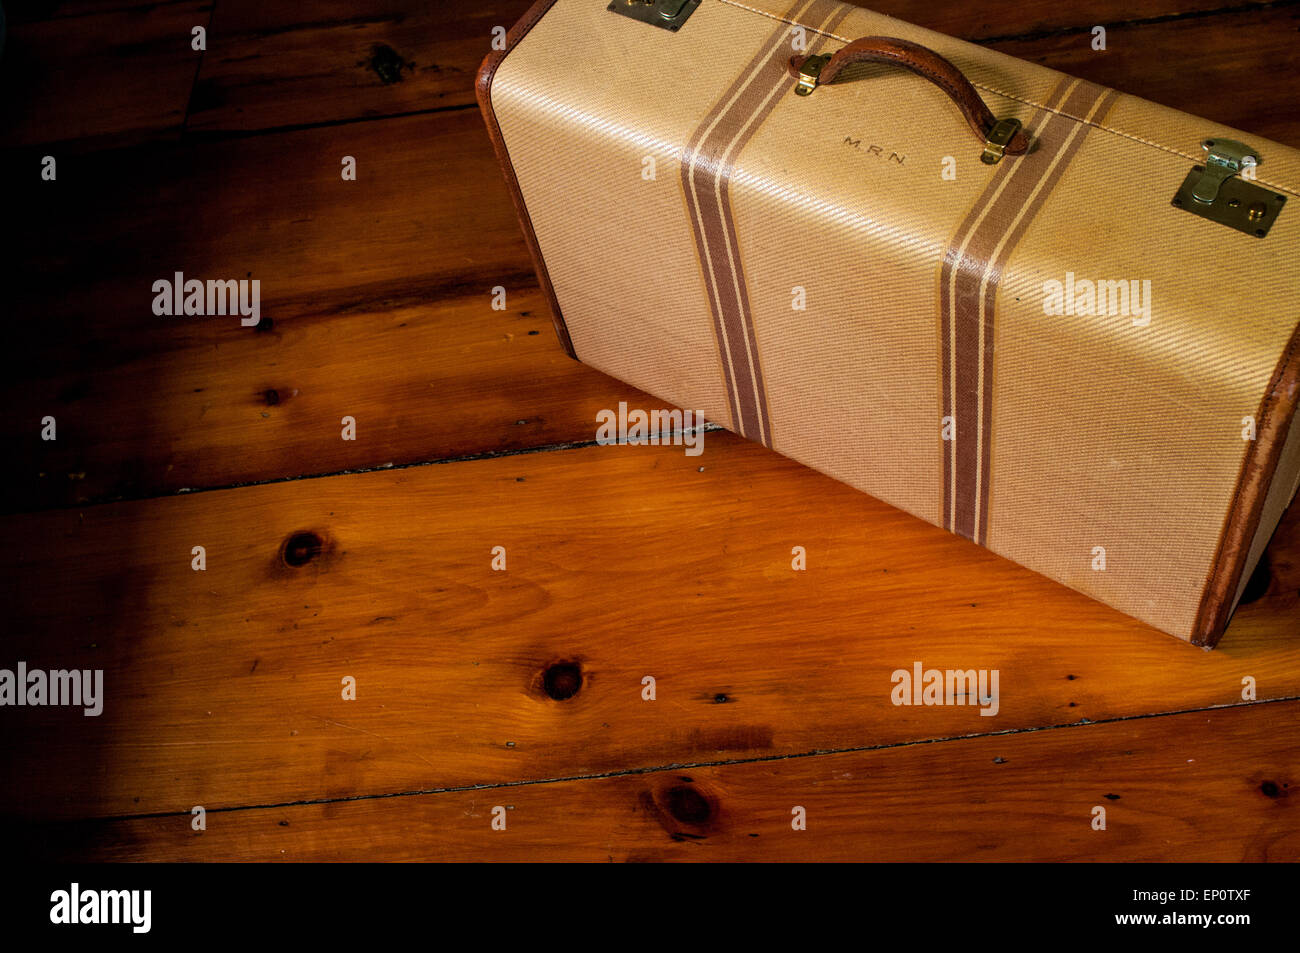 A monogrammed vintage suitcase sits on an old wood floor. Stock Photo